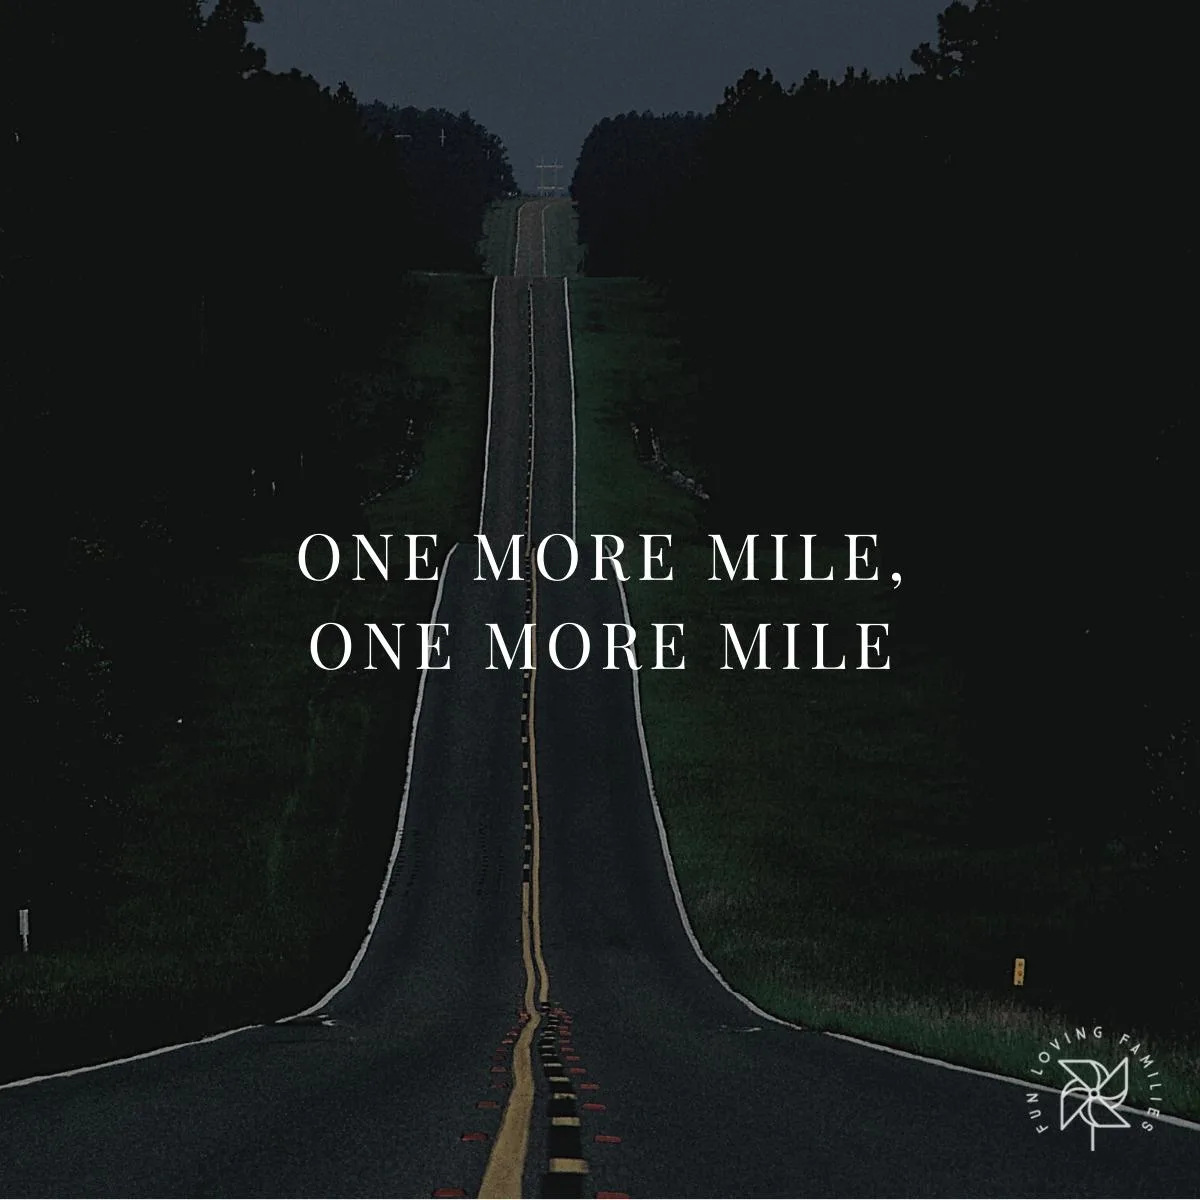 One more mile, One more mile affirmation